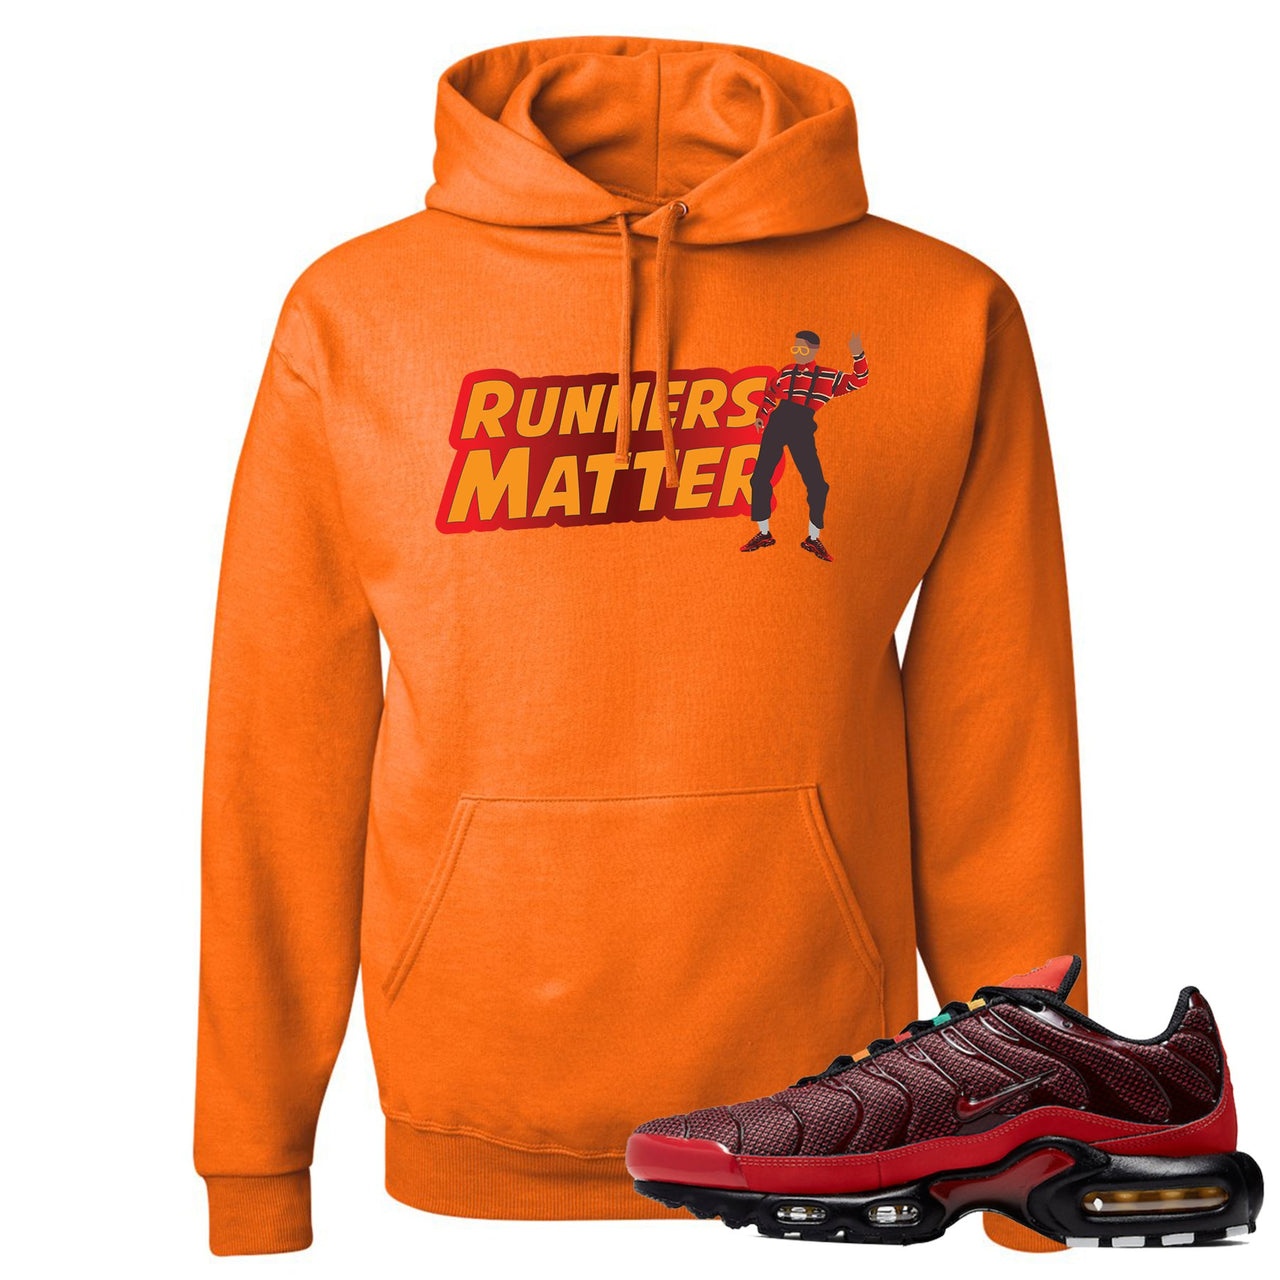 printed on the front of the air max plus sunburst sneaker matching safety orange pullover hoodie is the runners matter logo